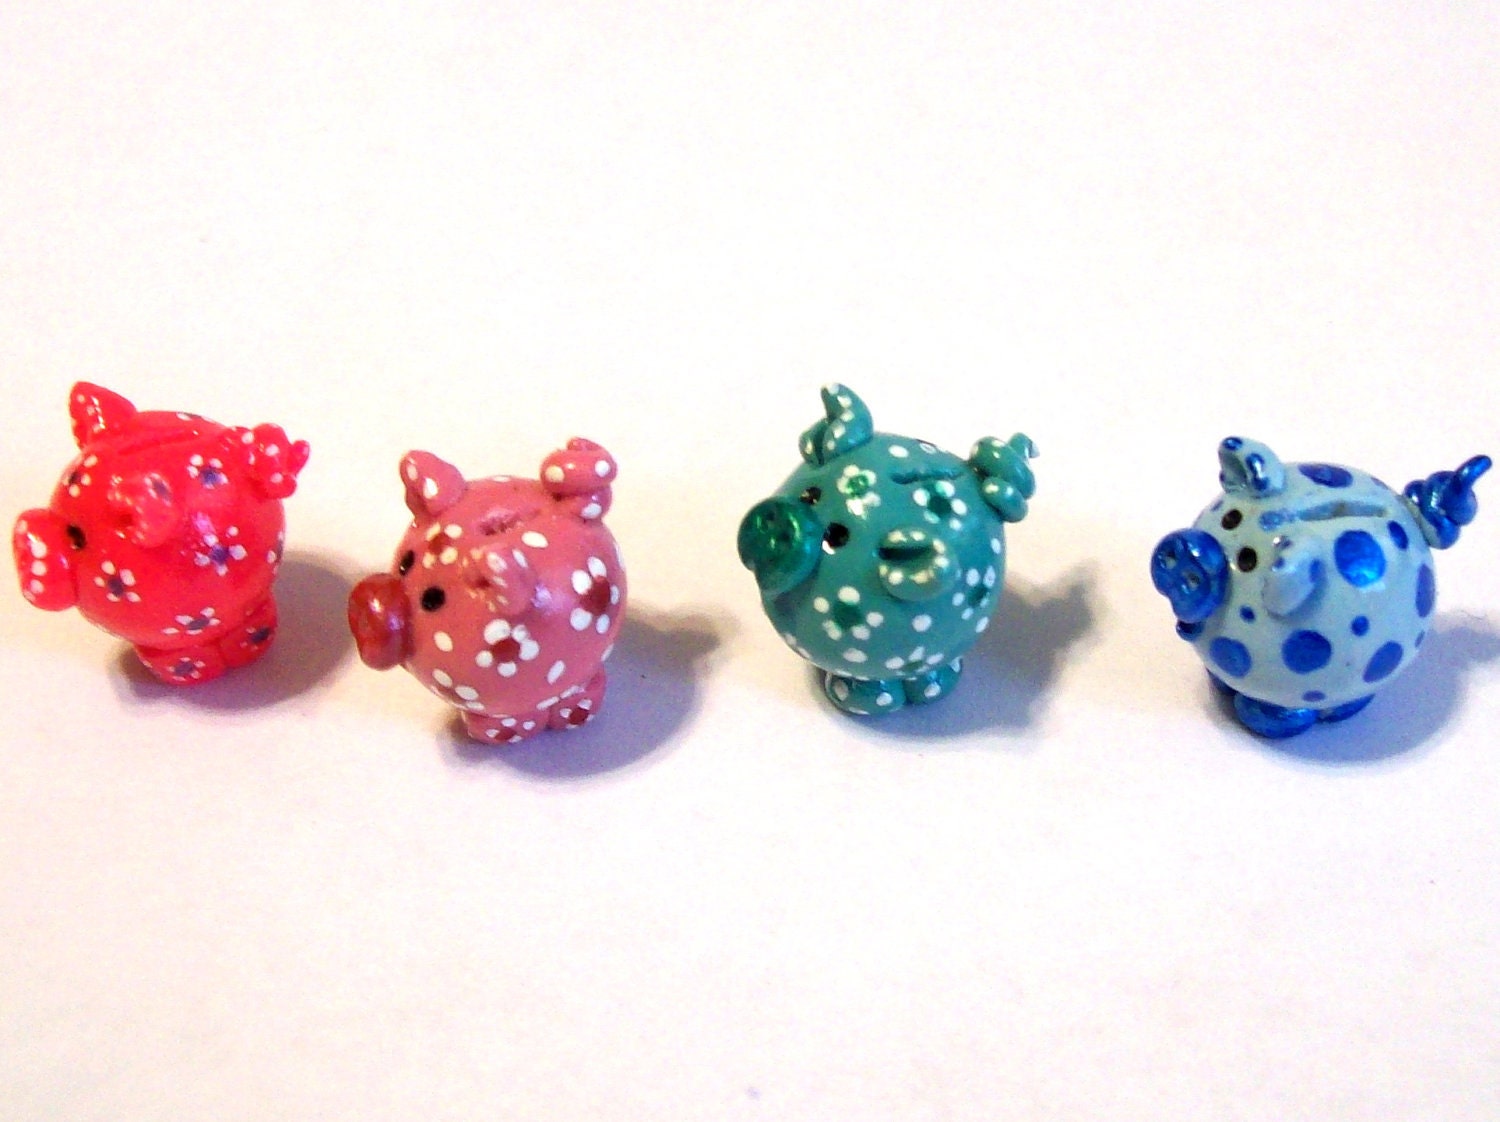 Piggy Ball Bank or Charm - New Original Design Handcrafted Mini Toy OOAK 1:12 Scale